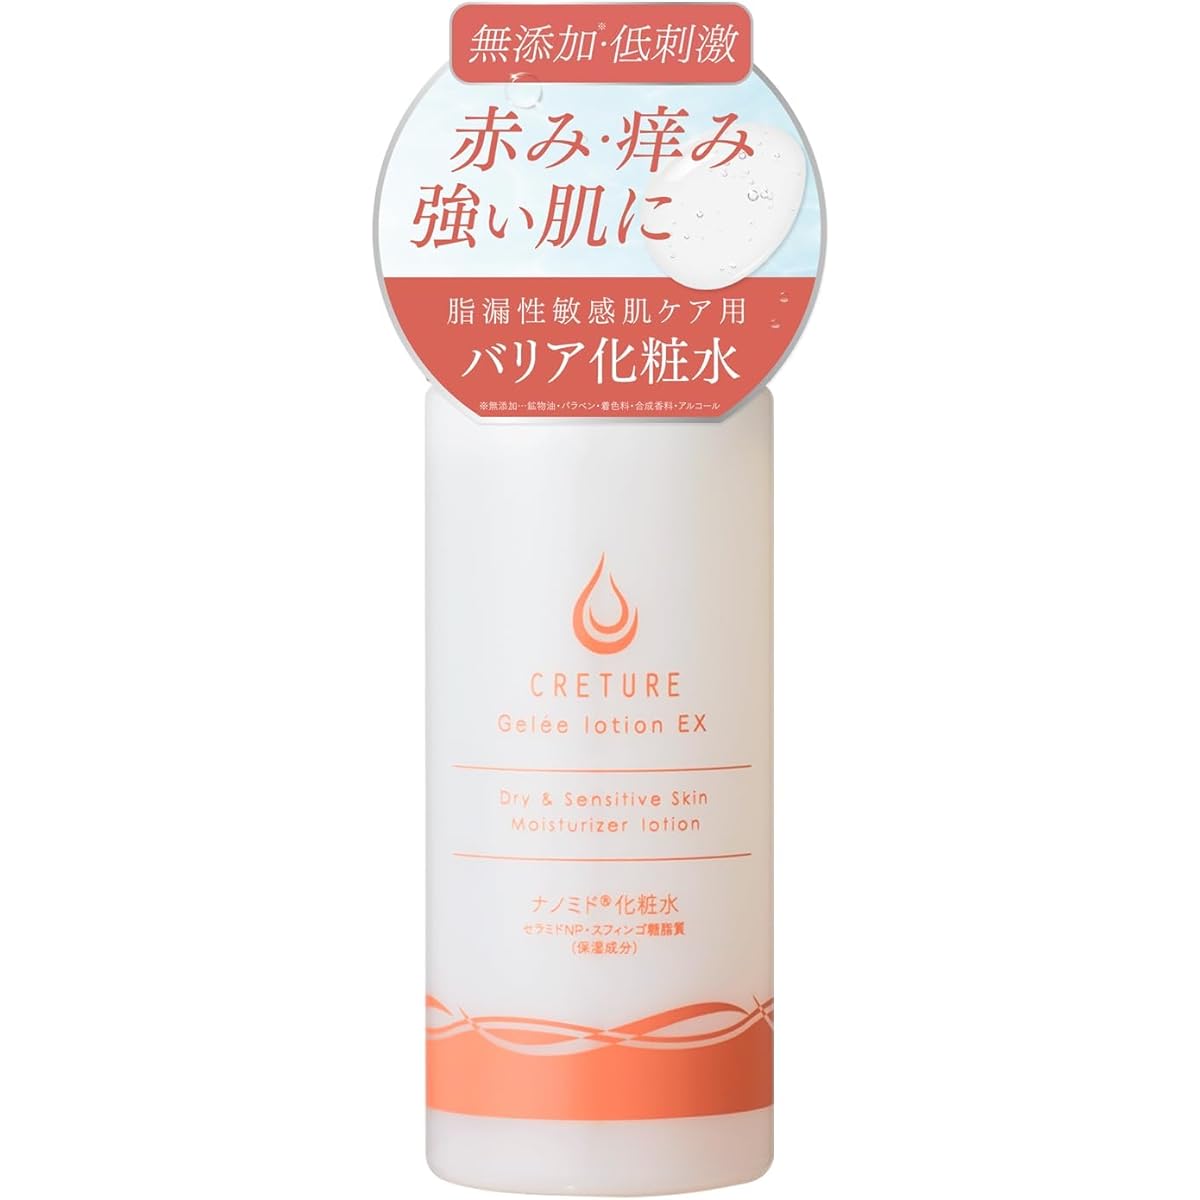 Dr. Re9 Creture Gelee Lotion EX Hypoallergenic Additive-free Fragrance-free Barrier Function Care Lotion  60ml / 30 days supply Made in Japan